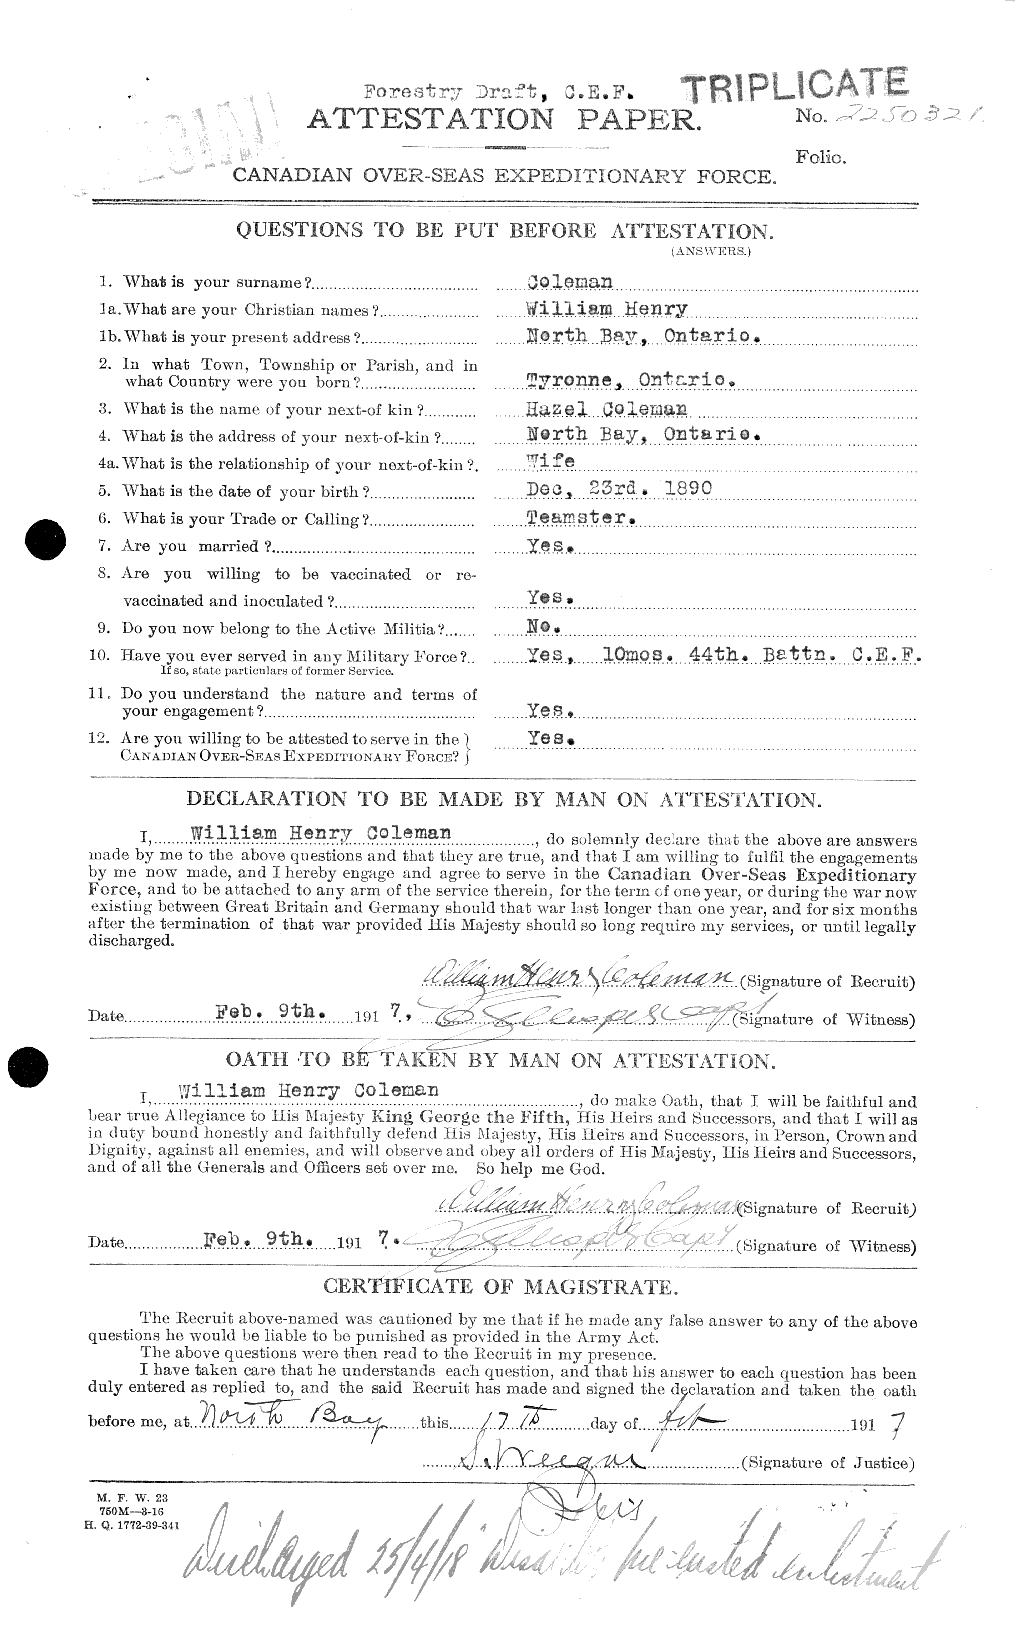 Personnel Records of the First World War - CEF 028315a